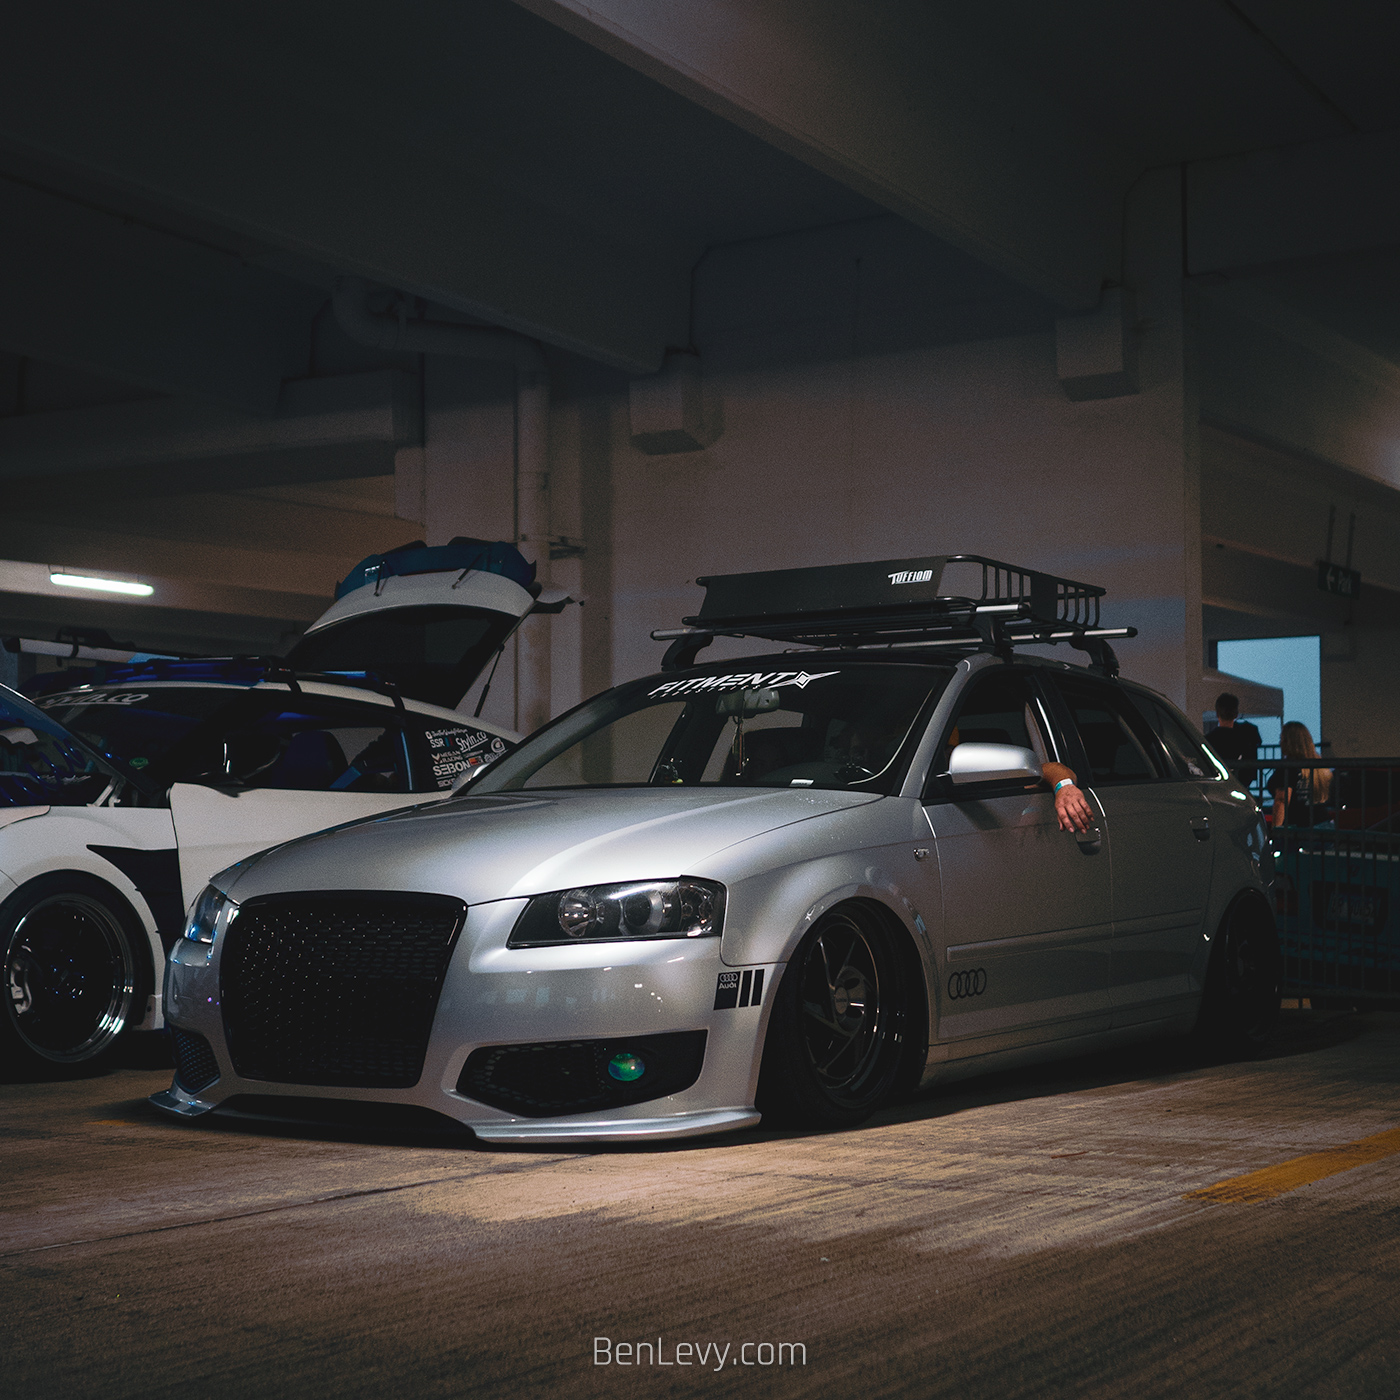 Bagged Audi A3 at the Parking Garage Party in Elgin